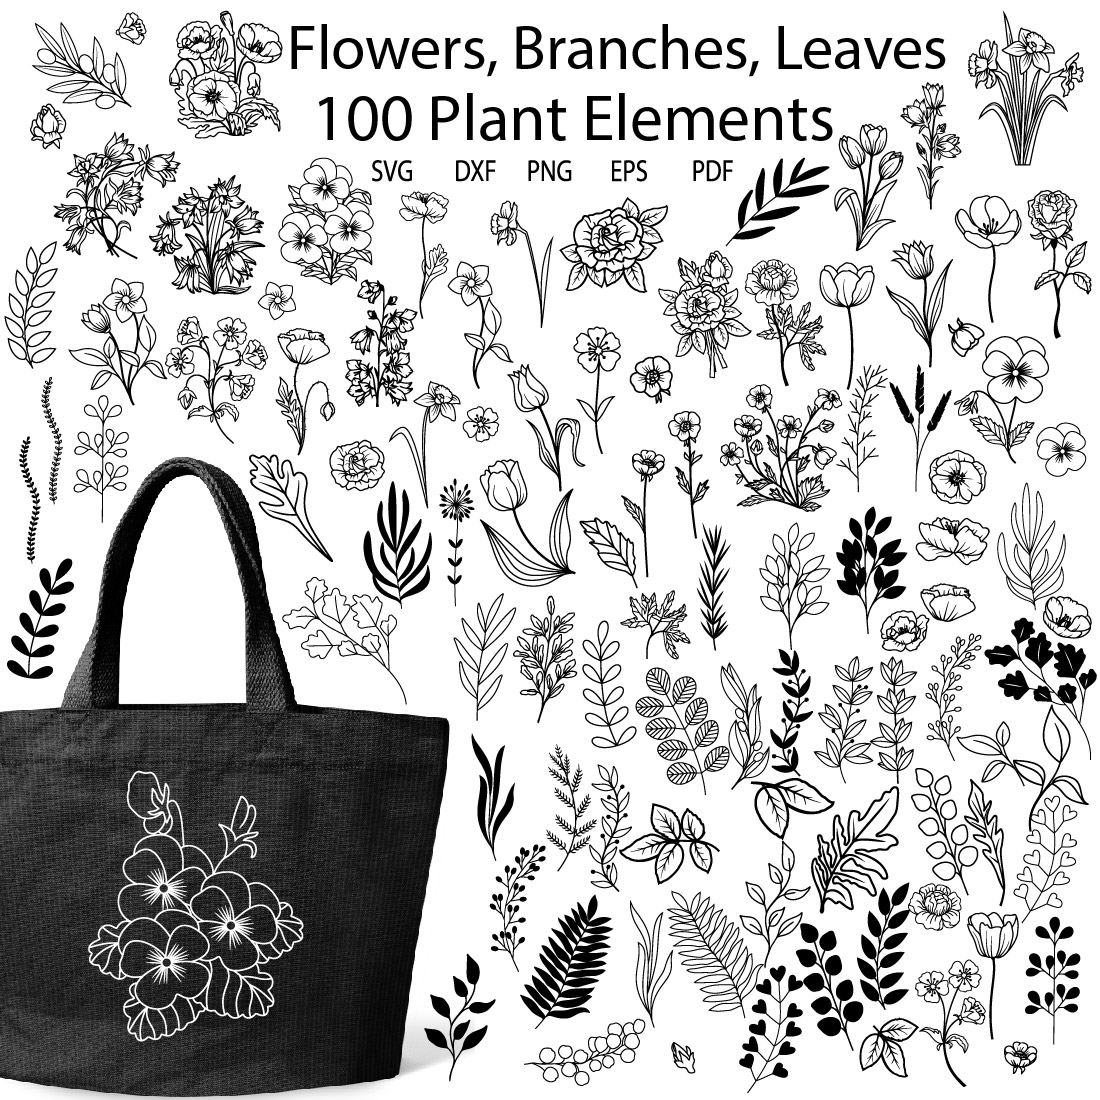 100 Botanical PNG Clipart. SVG Vector Flowers, Leaves, Branches cover image.